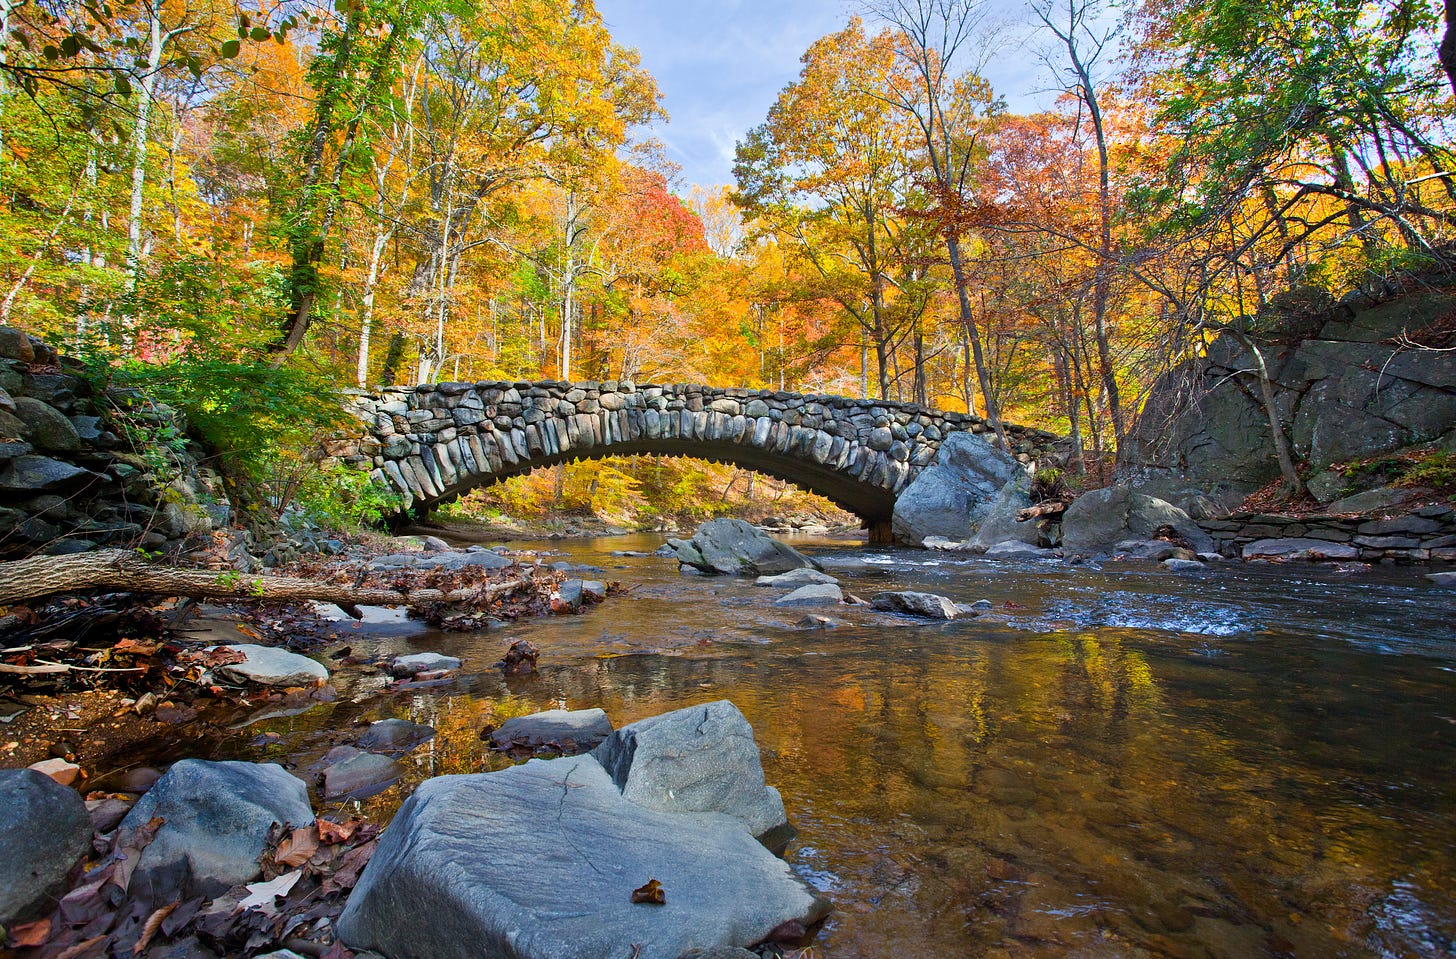 A bridge made of rocks stands over a rocky creek in the fall time.